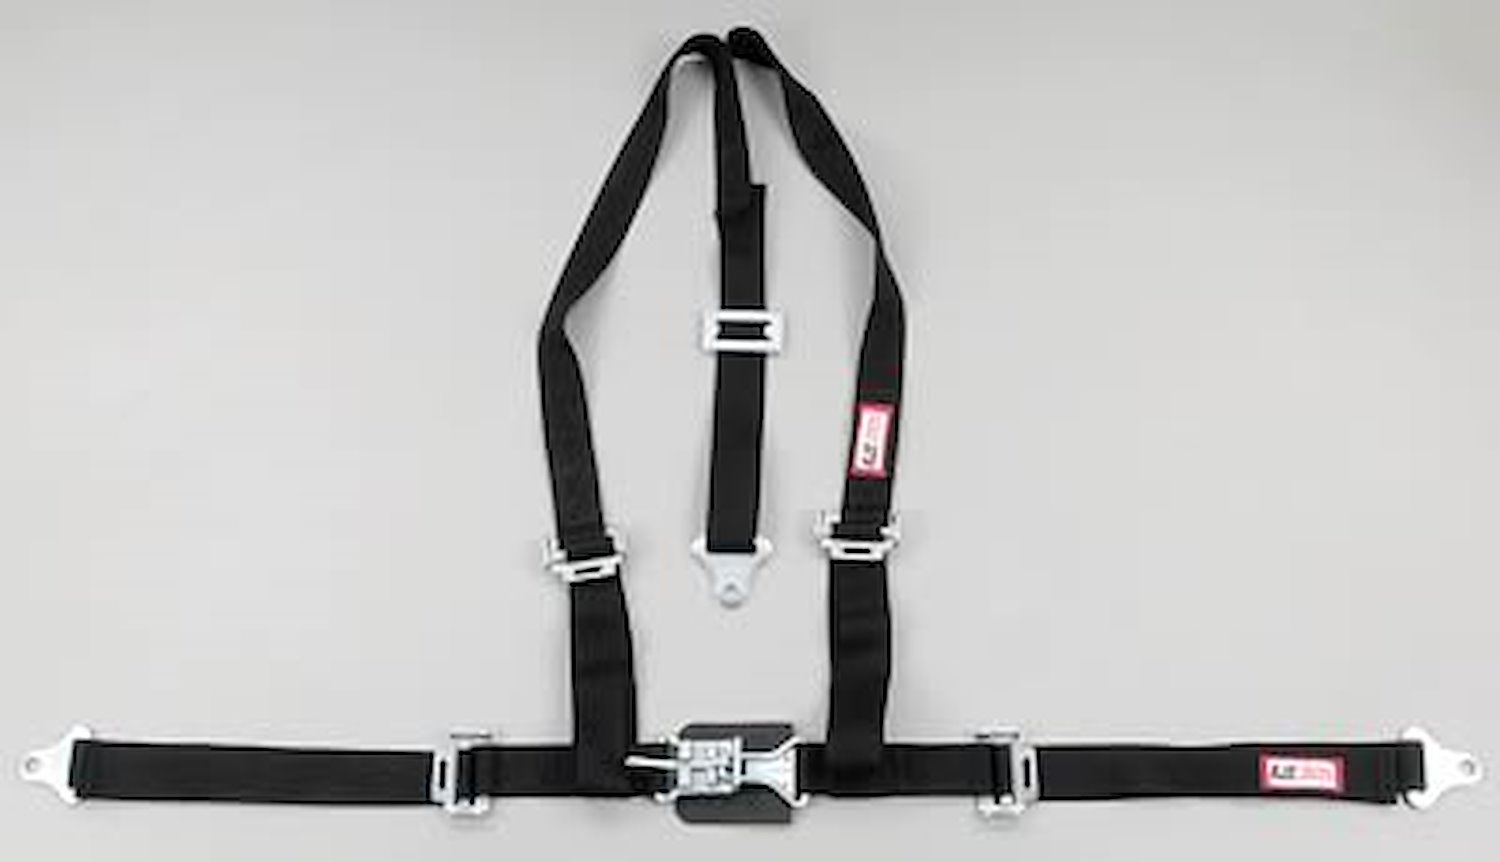 NON-SFI L&L HARNESS 3 PULL UP Lap Belt SEWN IN 2 Shoulder Harness V ROLL BAR Mount ALL WRAP ENDS RED